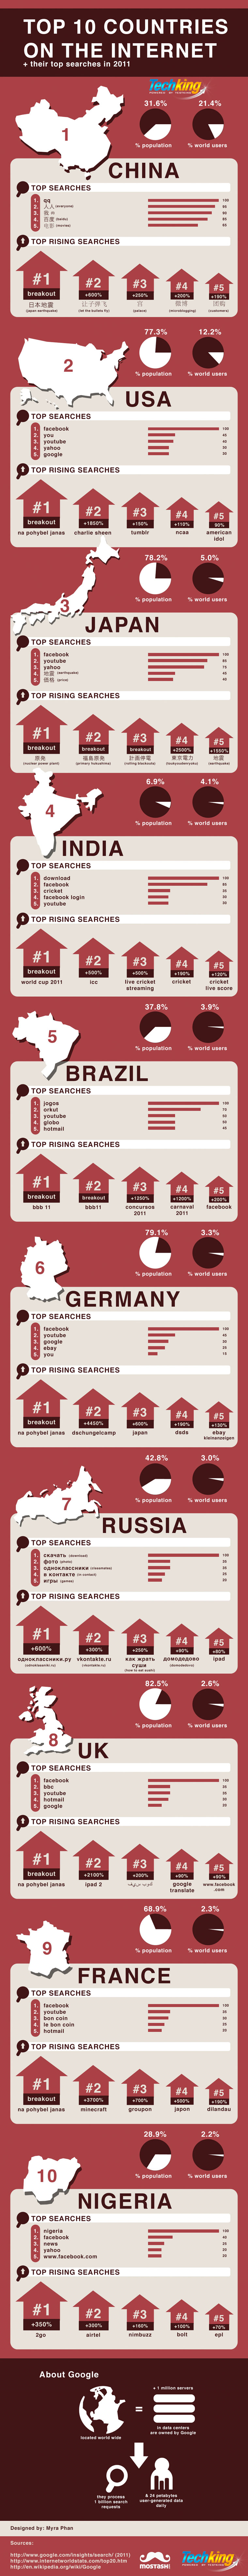 T
The Wonderful World of Search – Top 10 Countries and What They Search For - Infographic